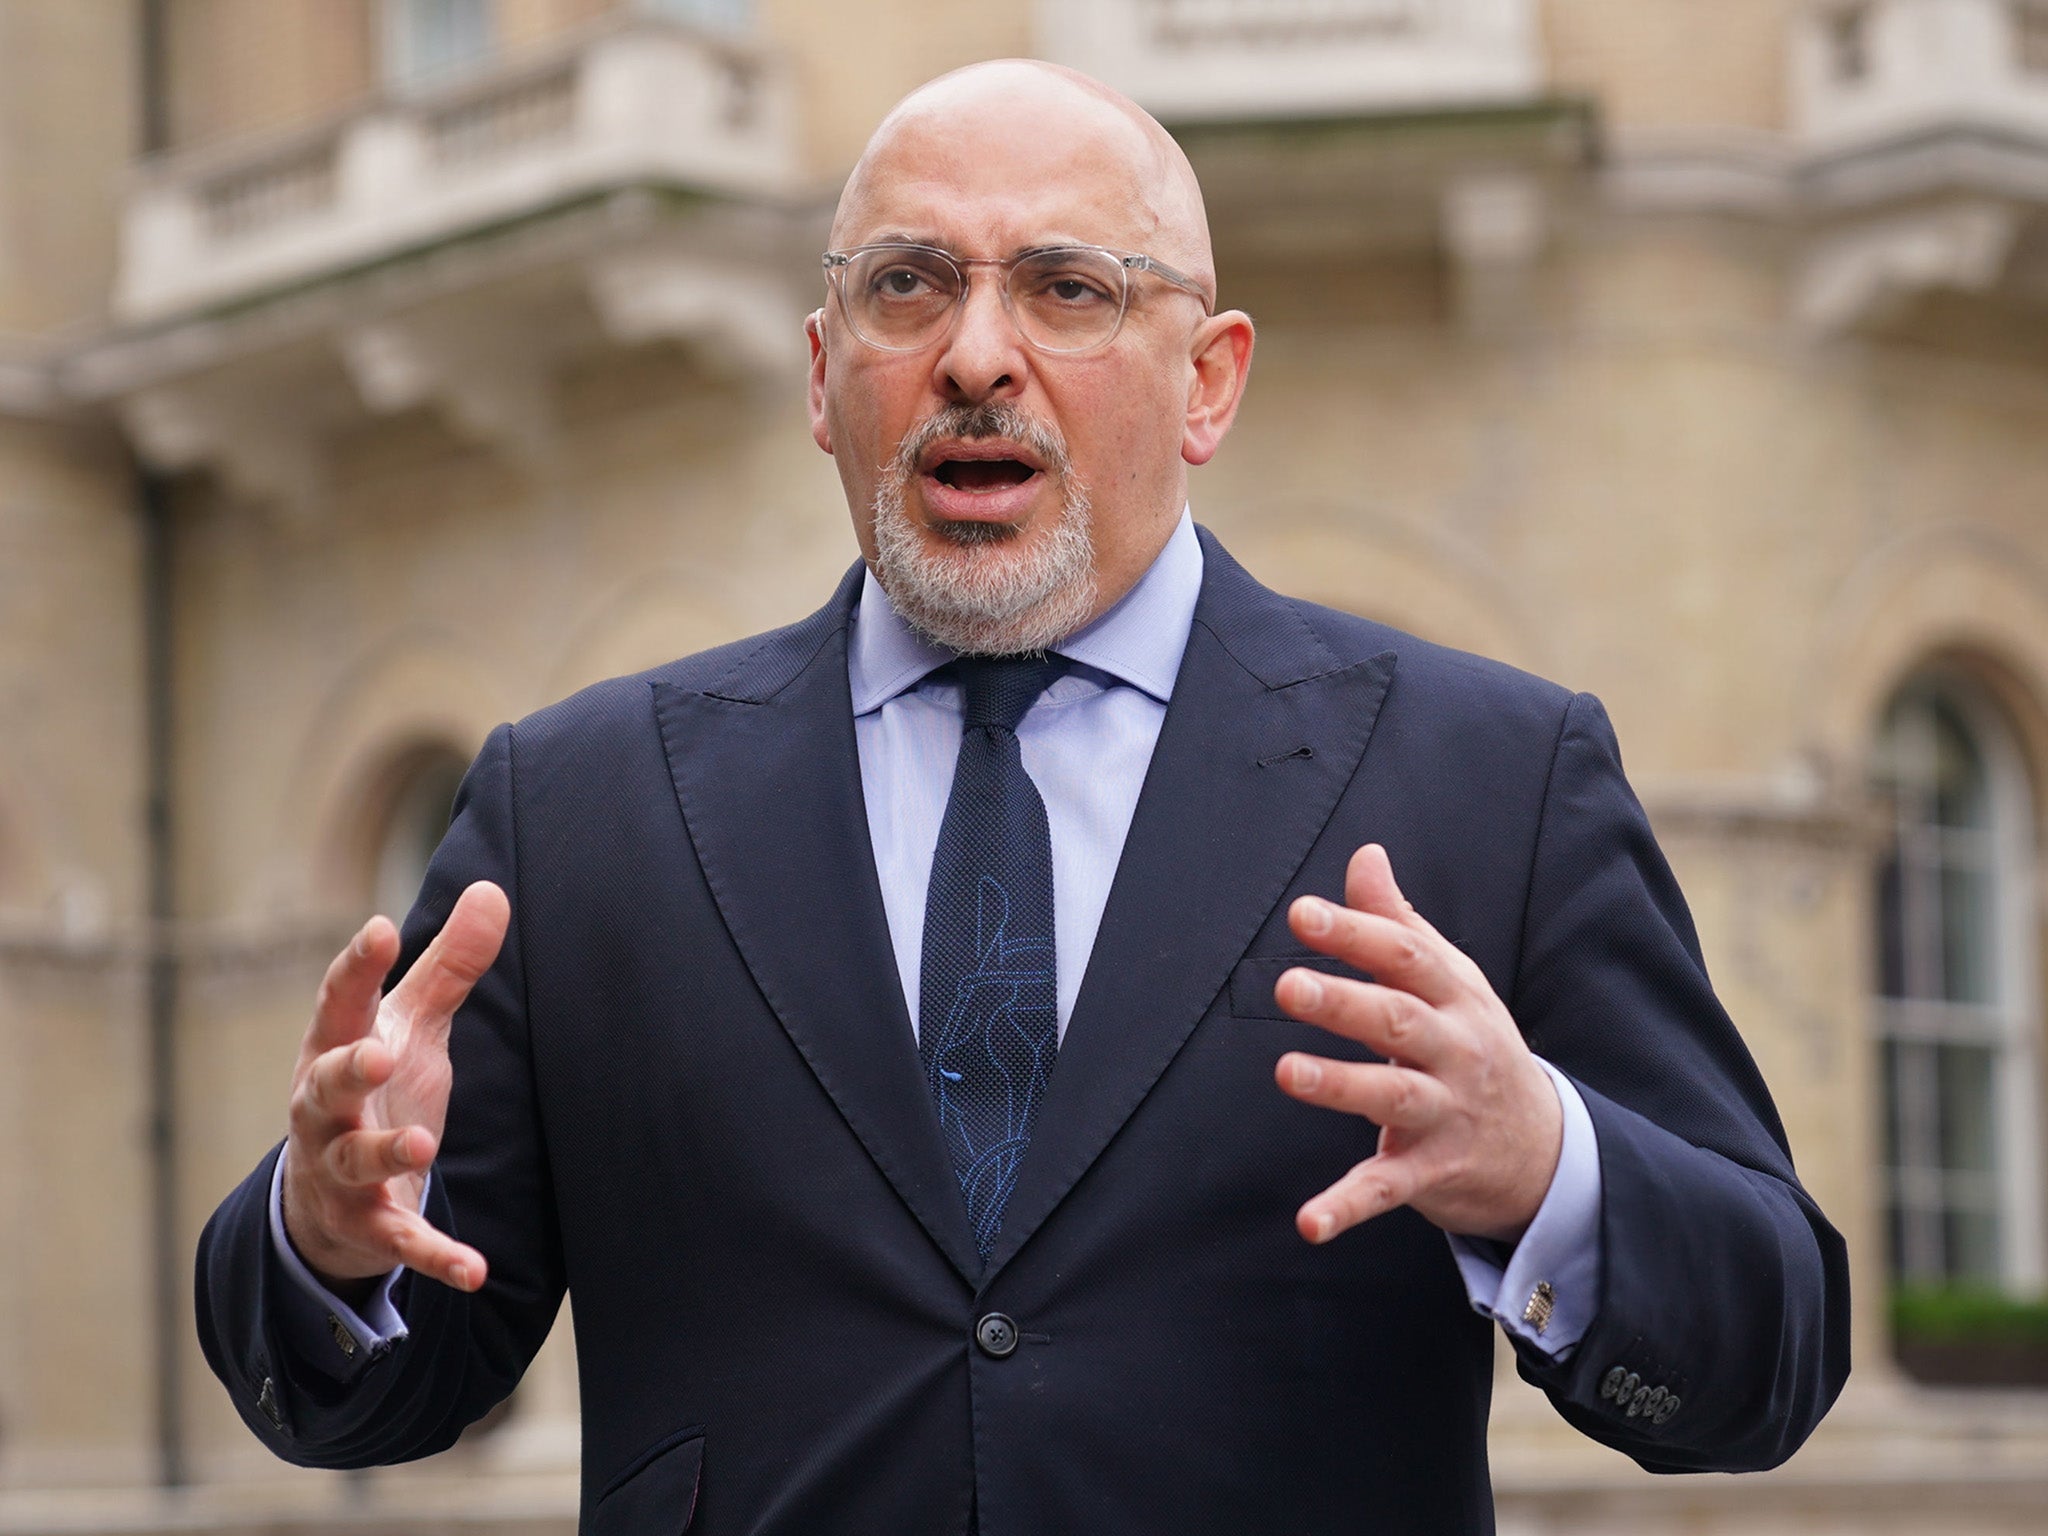 Vaccines minister Nadhim Zahawi: ‘It’s something we are absolutely thinking about’